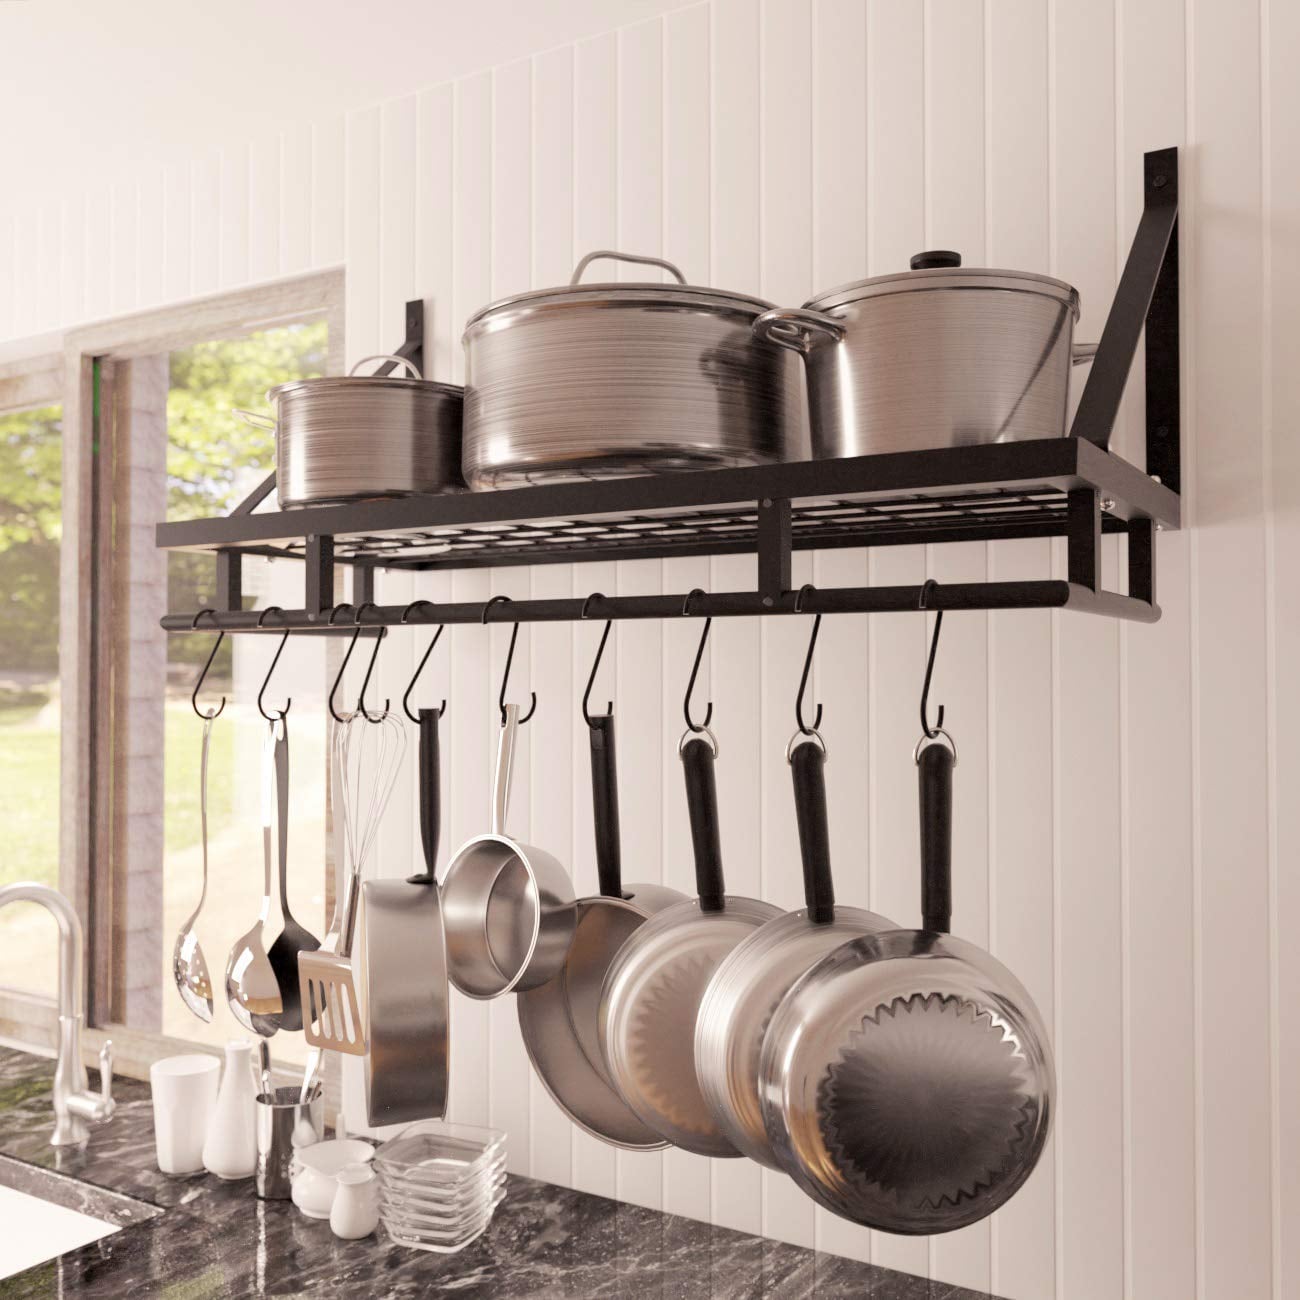 Kes Kitchen Pan Pot Rack Clear Your Countertops These Wall